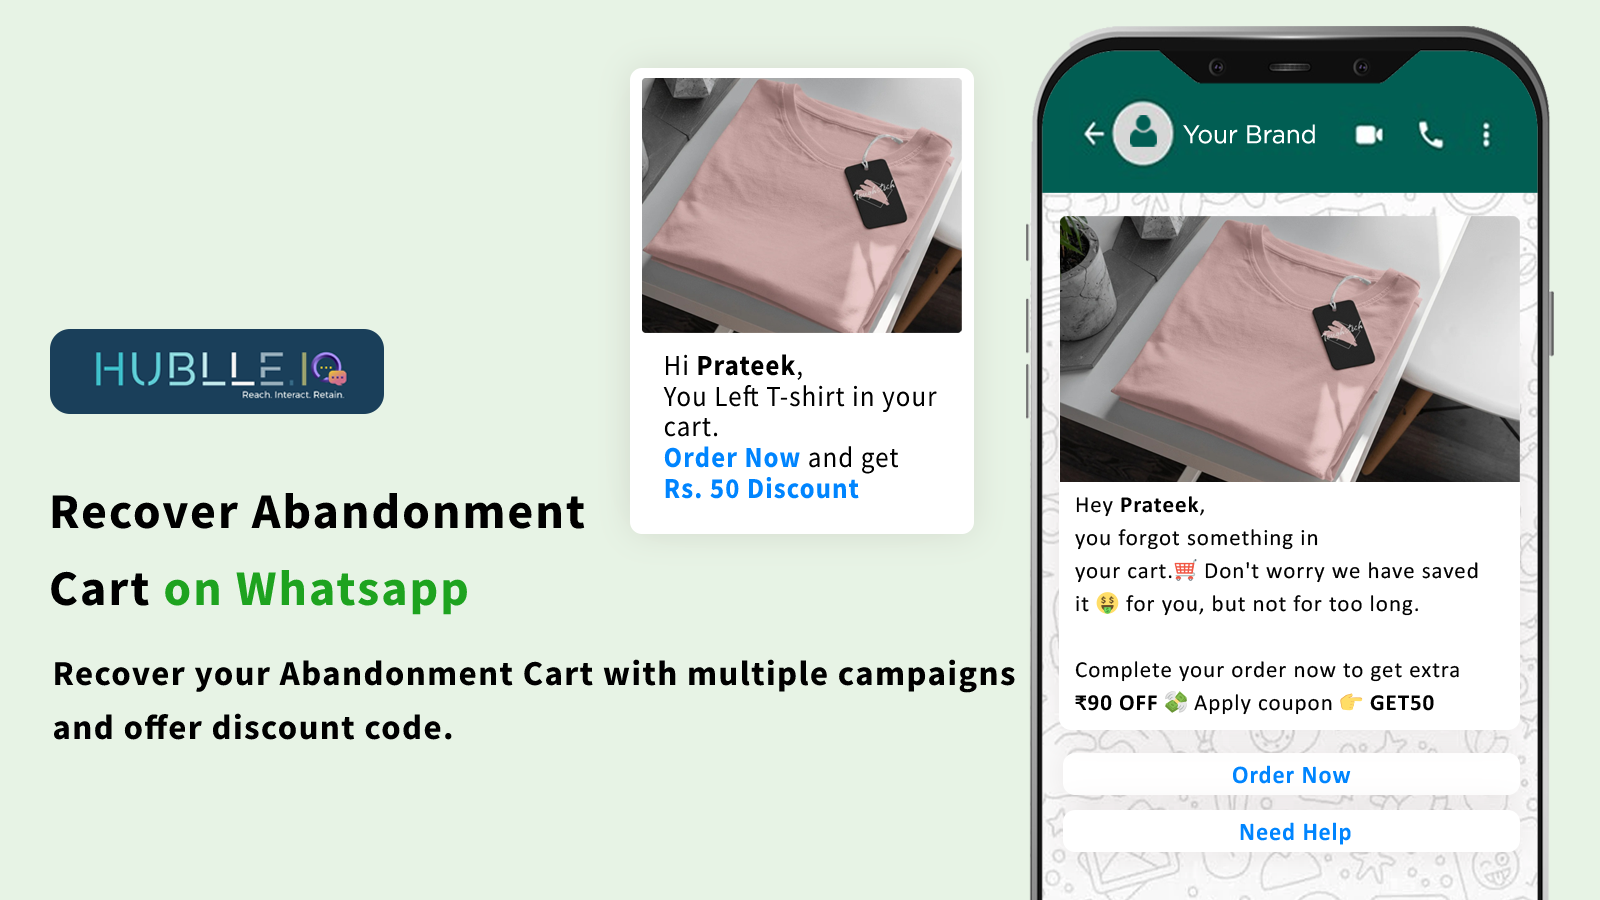 Recover abandonment cart and offer discount code with campaigns.